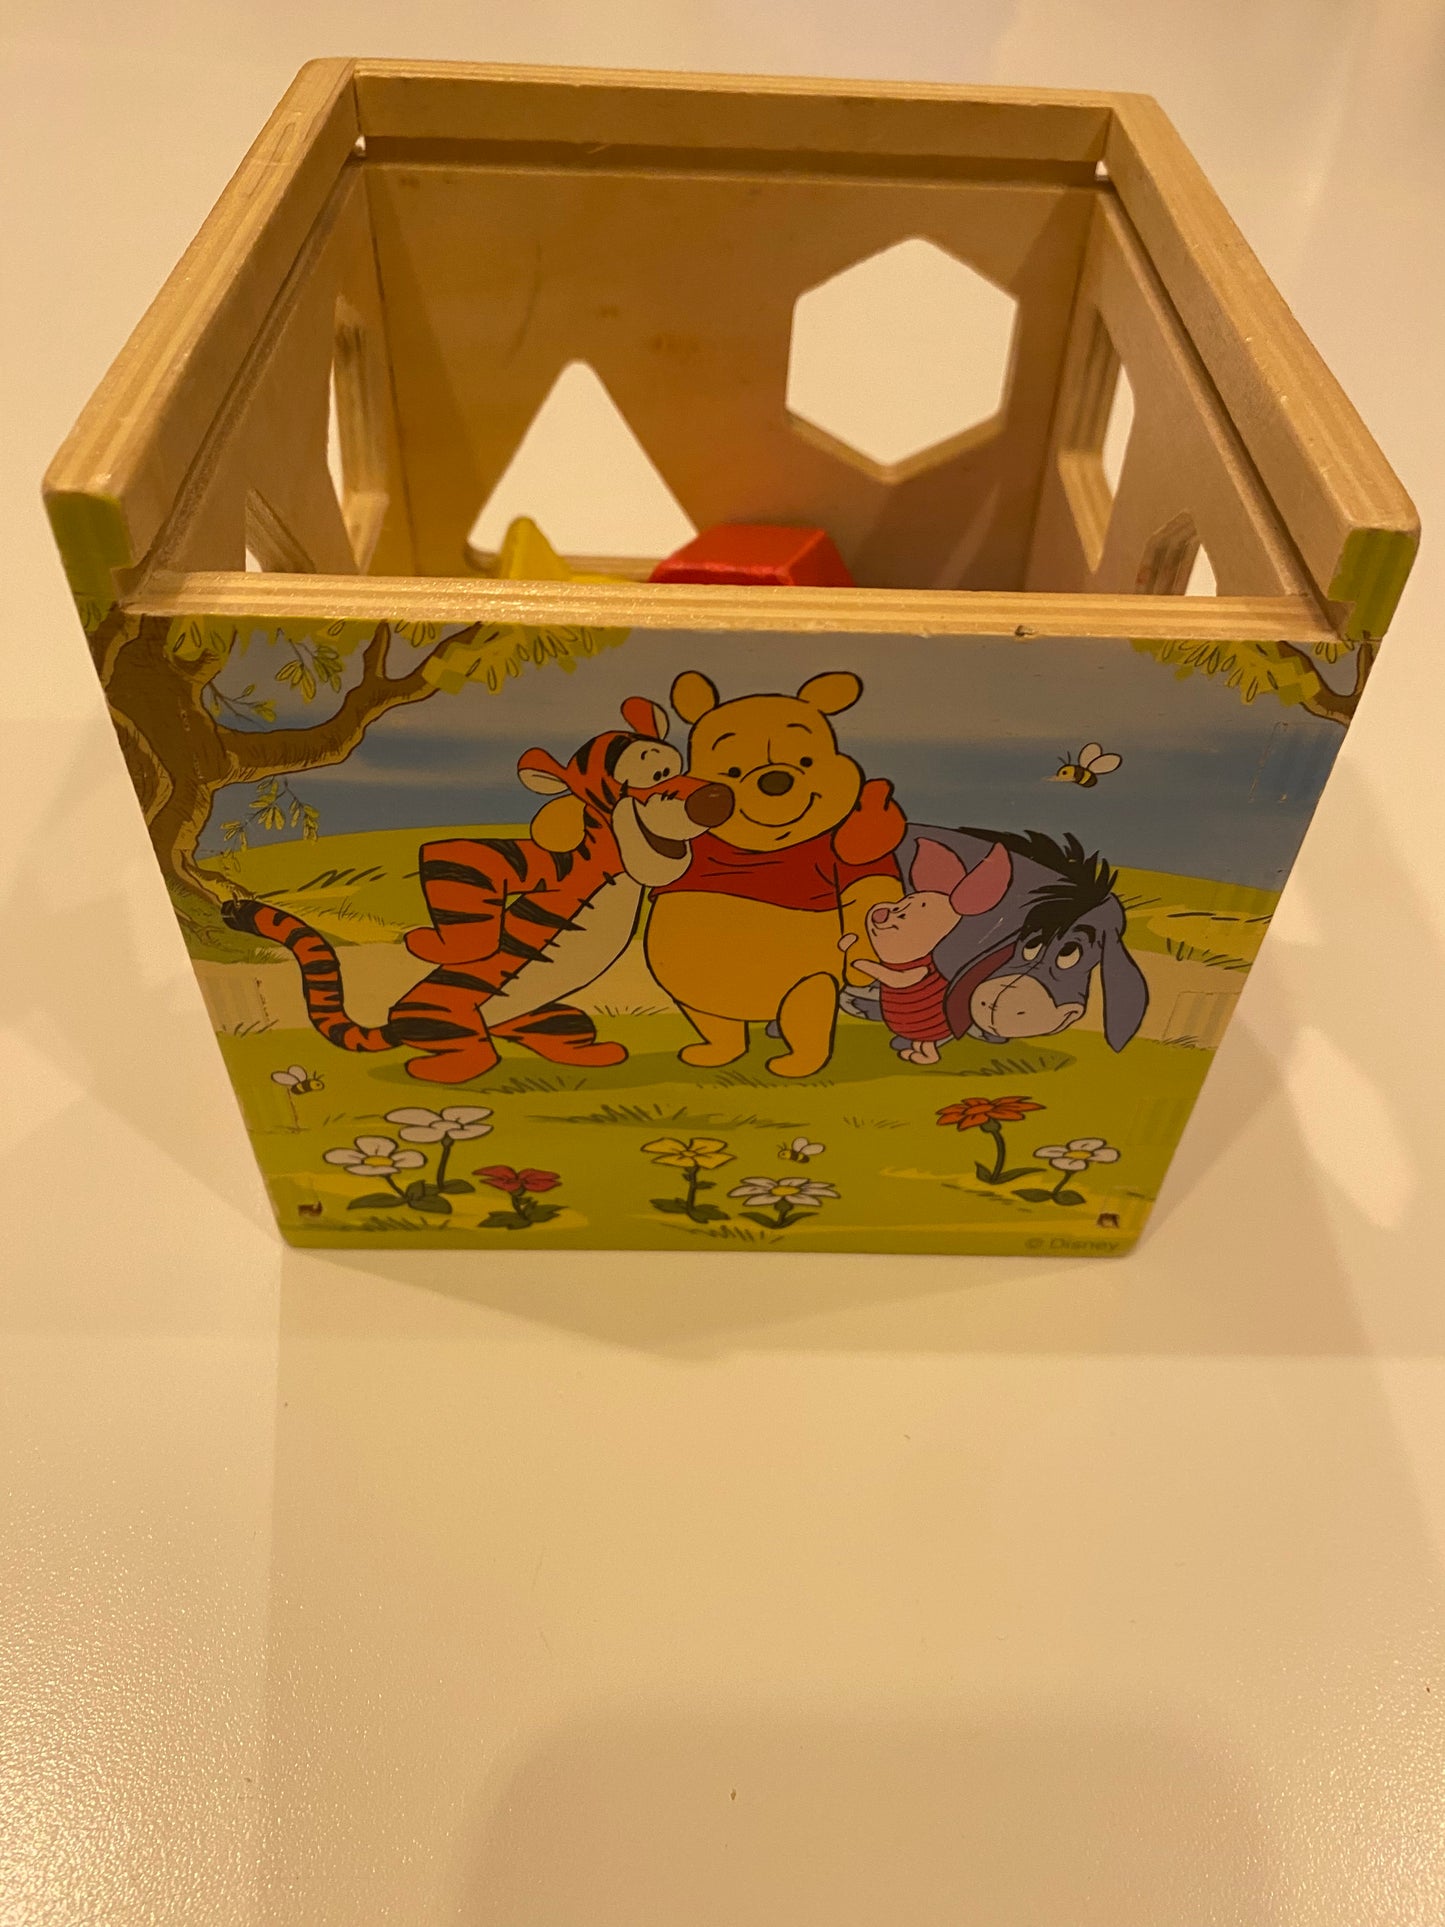 Melissa & Doug Winnie the Pooh Wooden Shape Sorting Cube & wooden shapes.